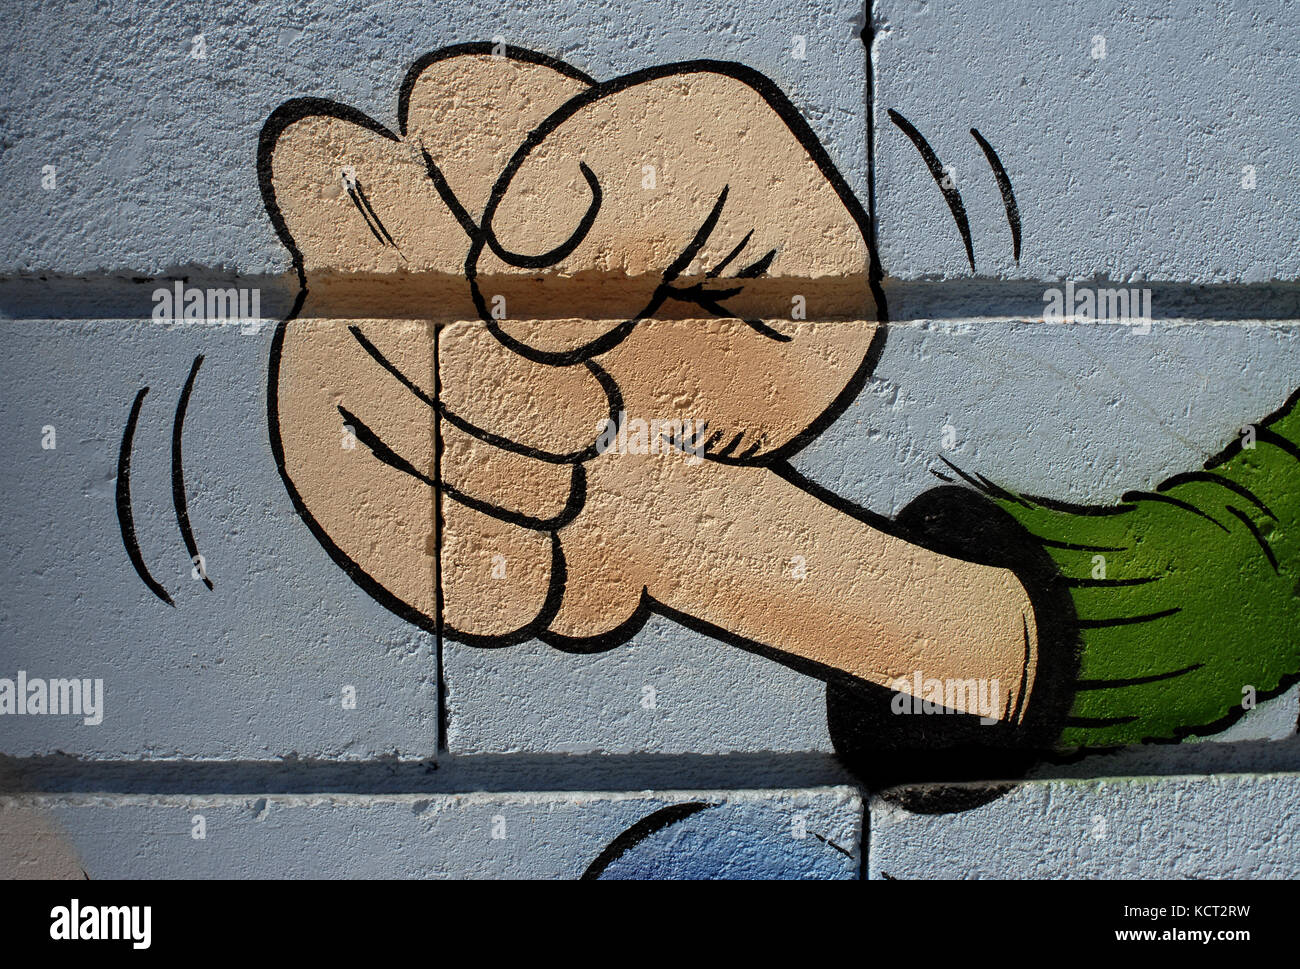 Graffiti Graphic Of Clenched Fists Stock Illustration - Download Image Now  - Graffiti, Stencil, Art - iStock